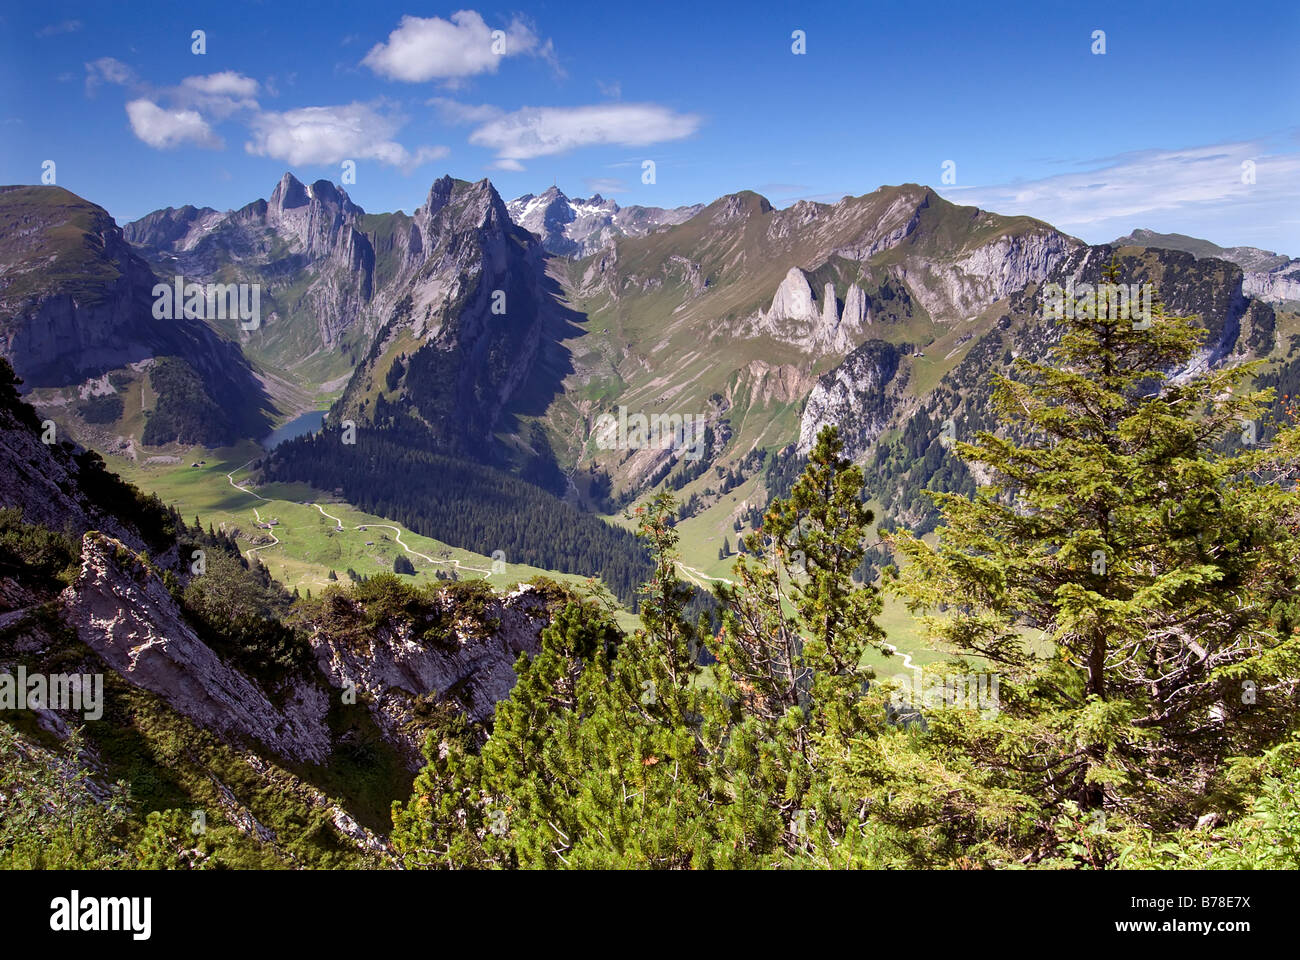 Landscape in the Alpstein Alps, Mt Saentis, 2502 m, and Faelensee Lake, Cantons of Appenzell Ausserrhoden, Appenzell Innerrhode Stock Photo